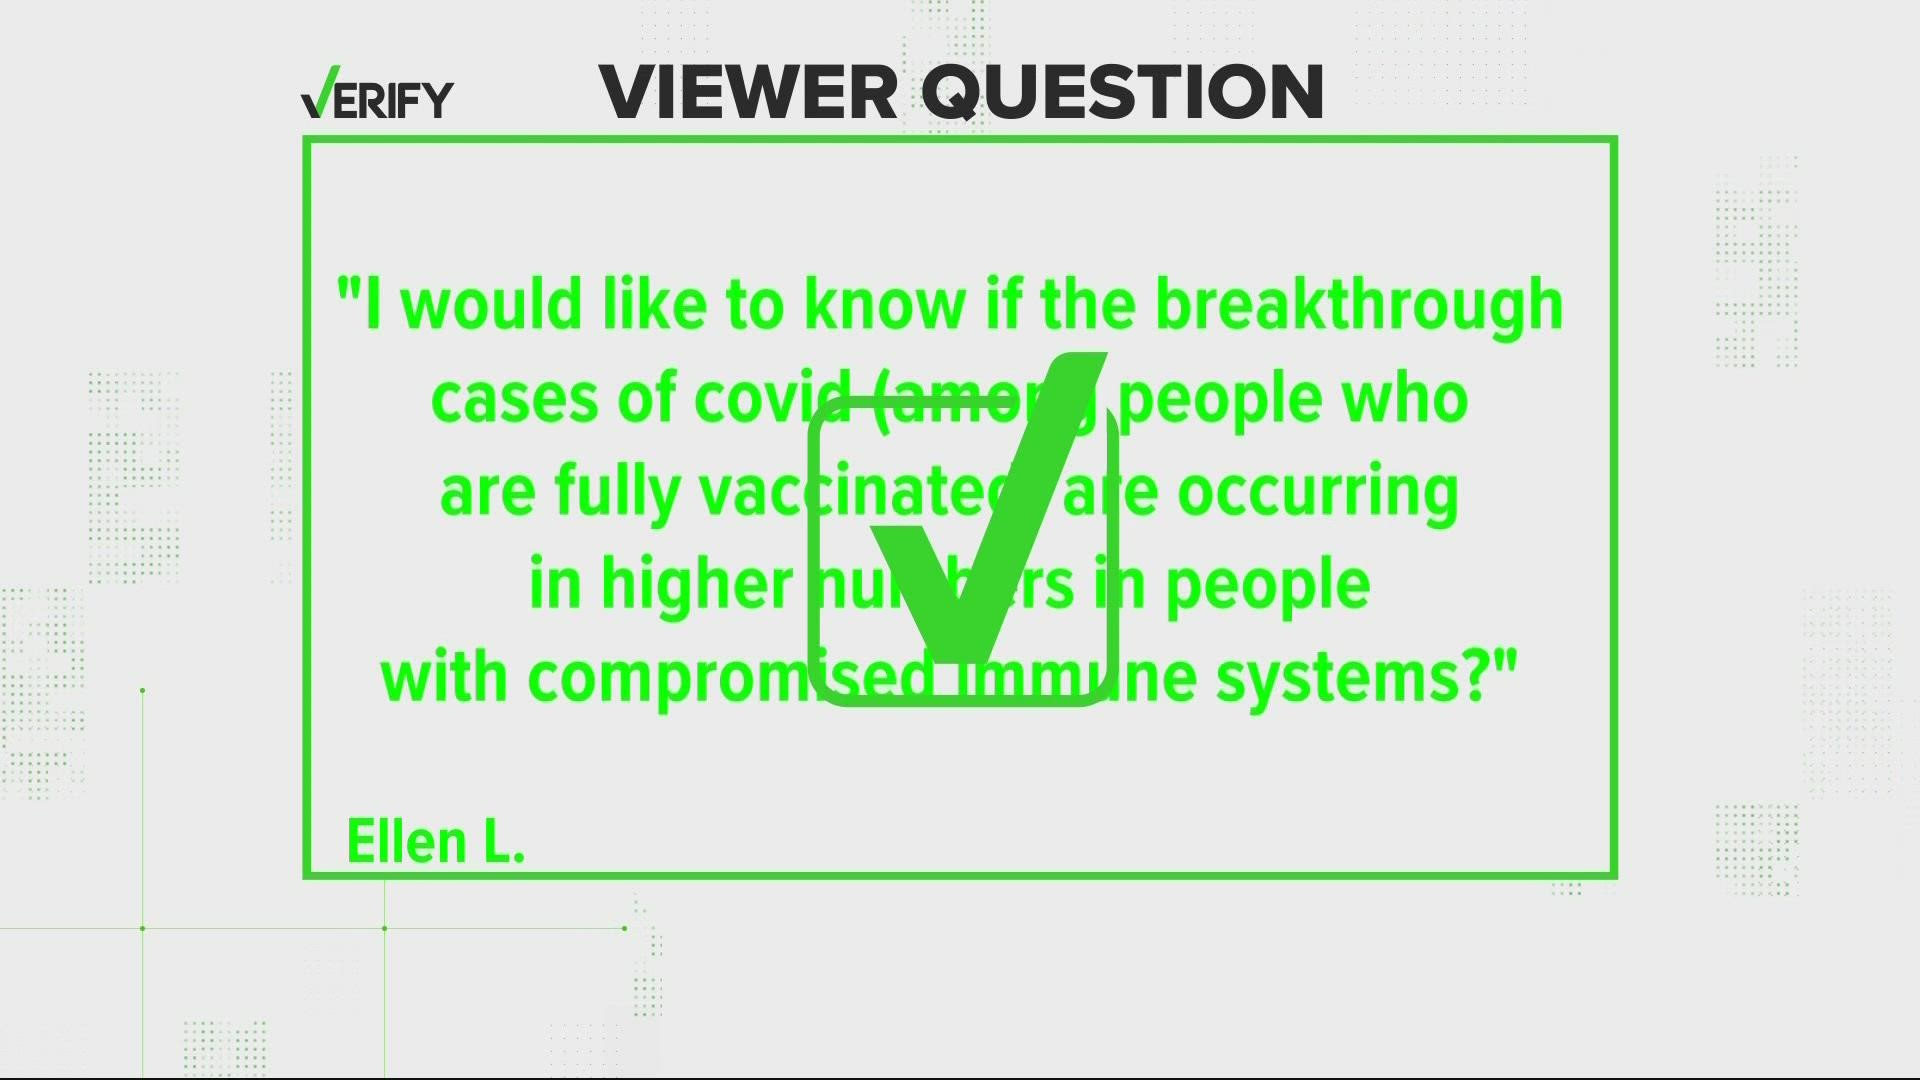 WCNC Charlotte viewer Ellen L. first posed this question, asking if breakthrough cases were happening more in people with compromised immune systems.